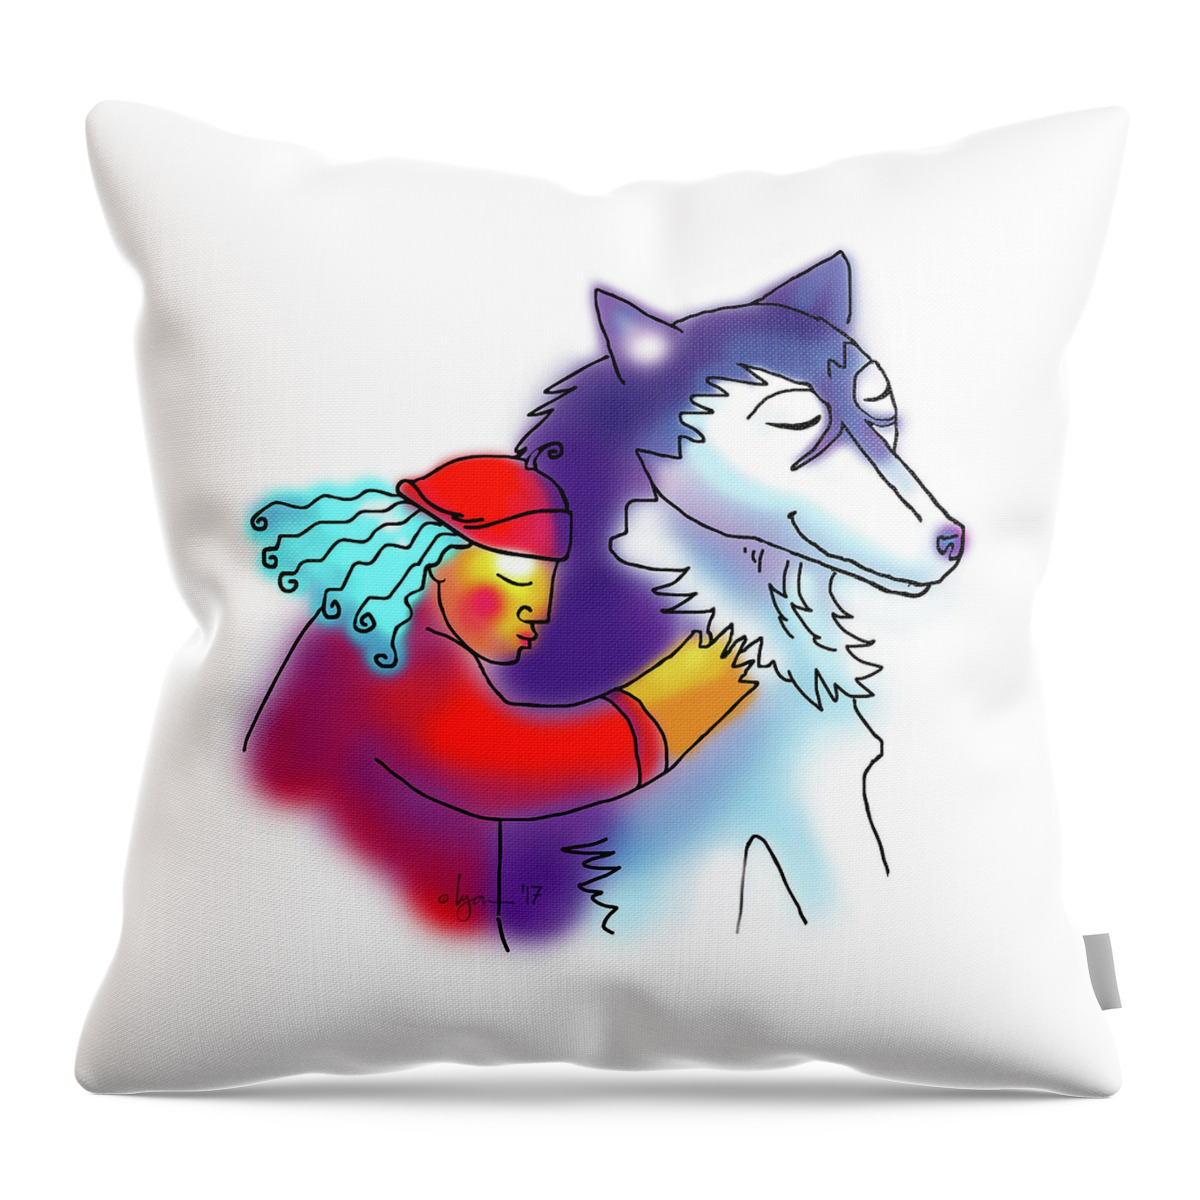 Dogs Throw Pillow featuring the drawing Husky Love by Angela Treat Lyon